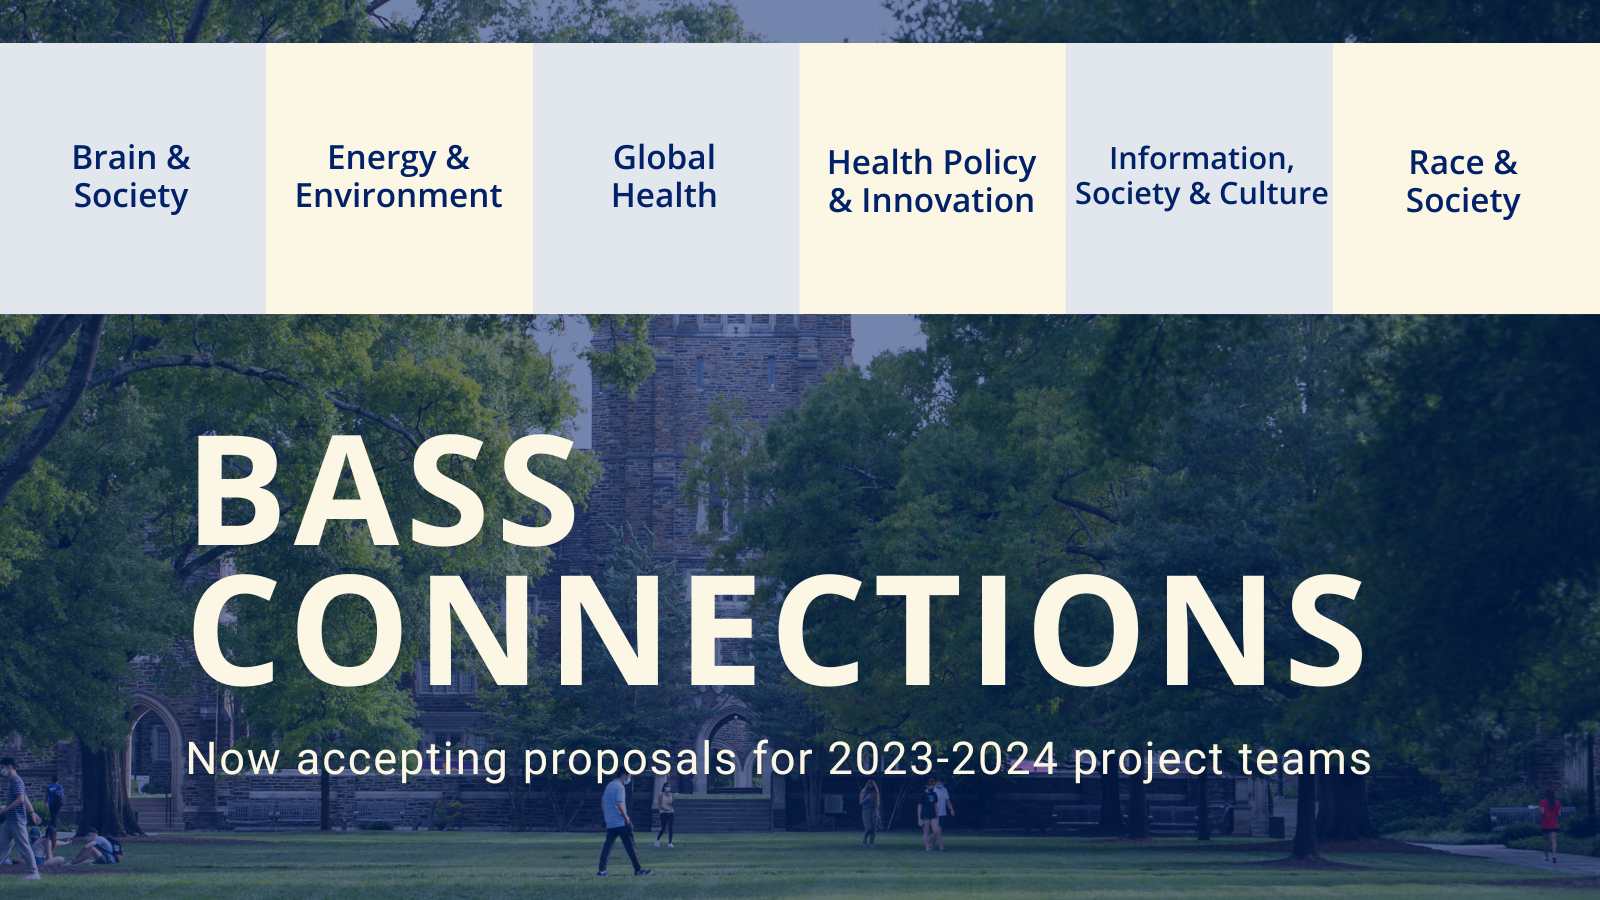 RFP for 2023-2024 projects.